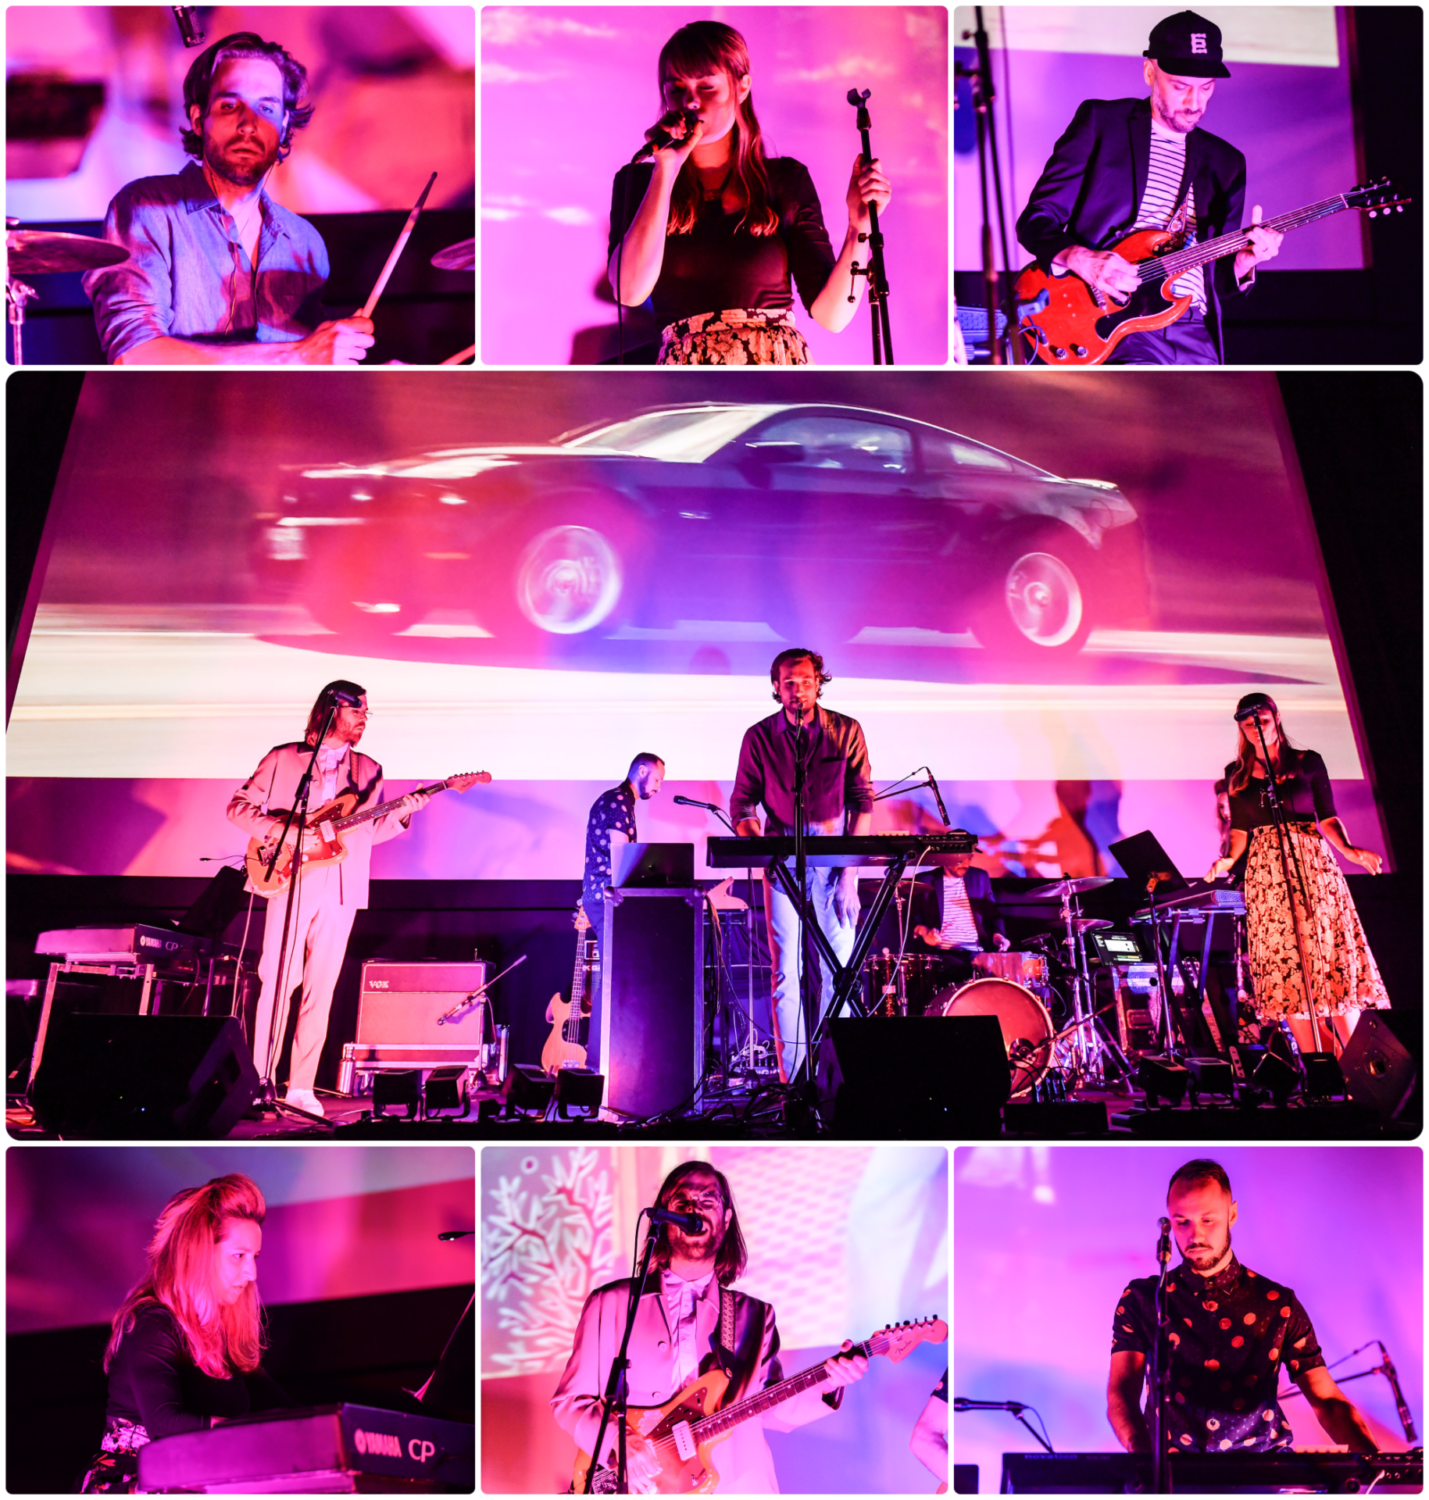 Three rows of photos in a gallery: top row is three close-ups of musicians performing; middle photo is long shot of a group of musicians onstage; bottom three areclose-ups of individual performers. All photos have a pink background because the lighting.